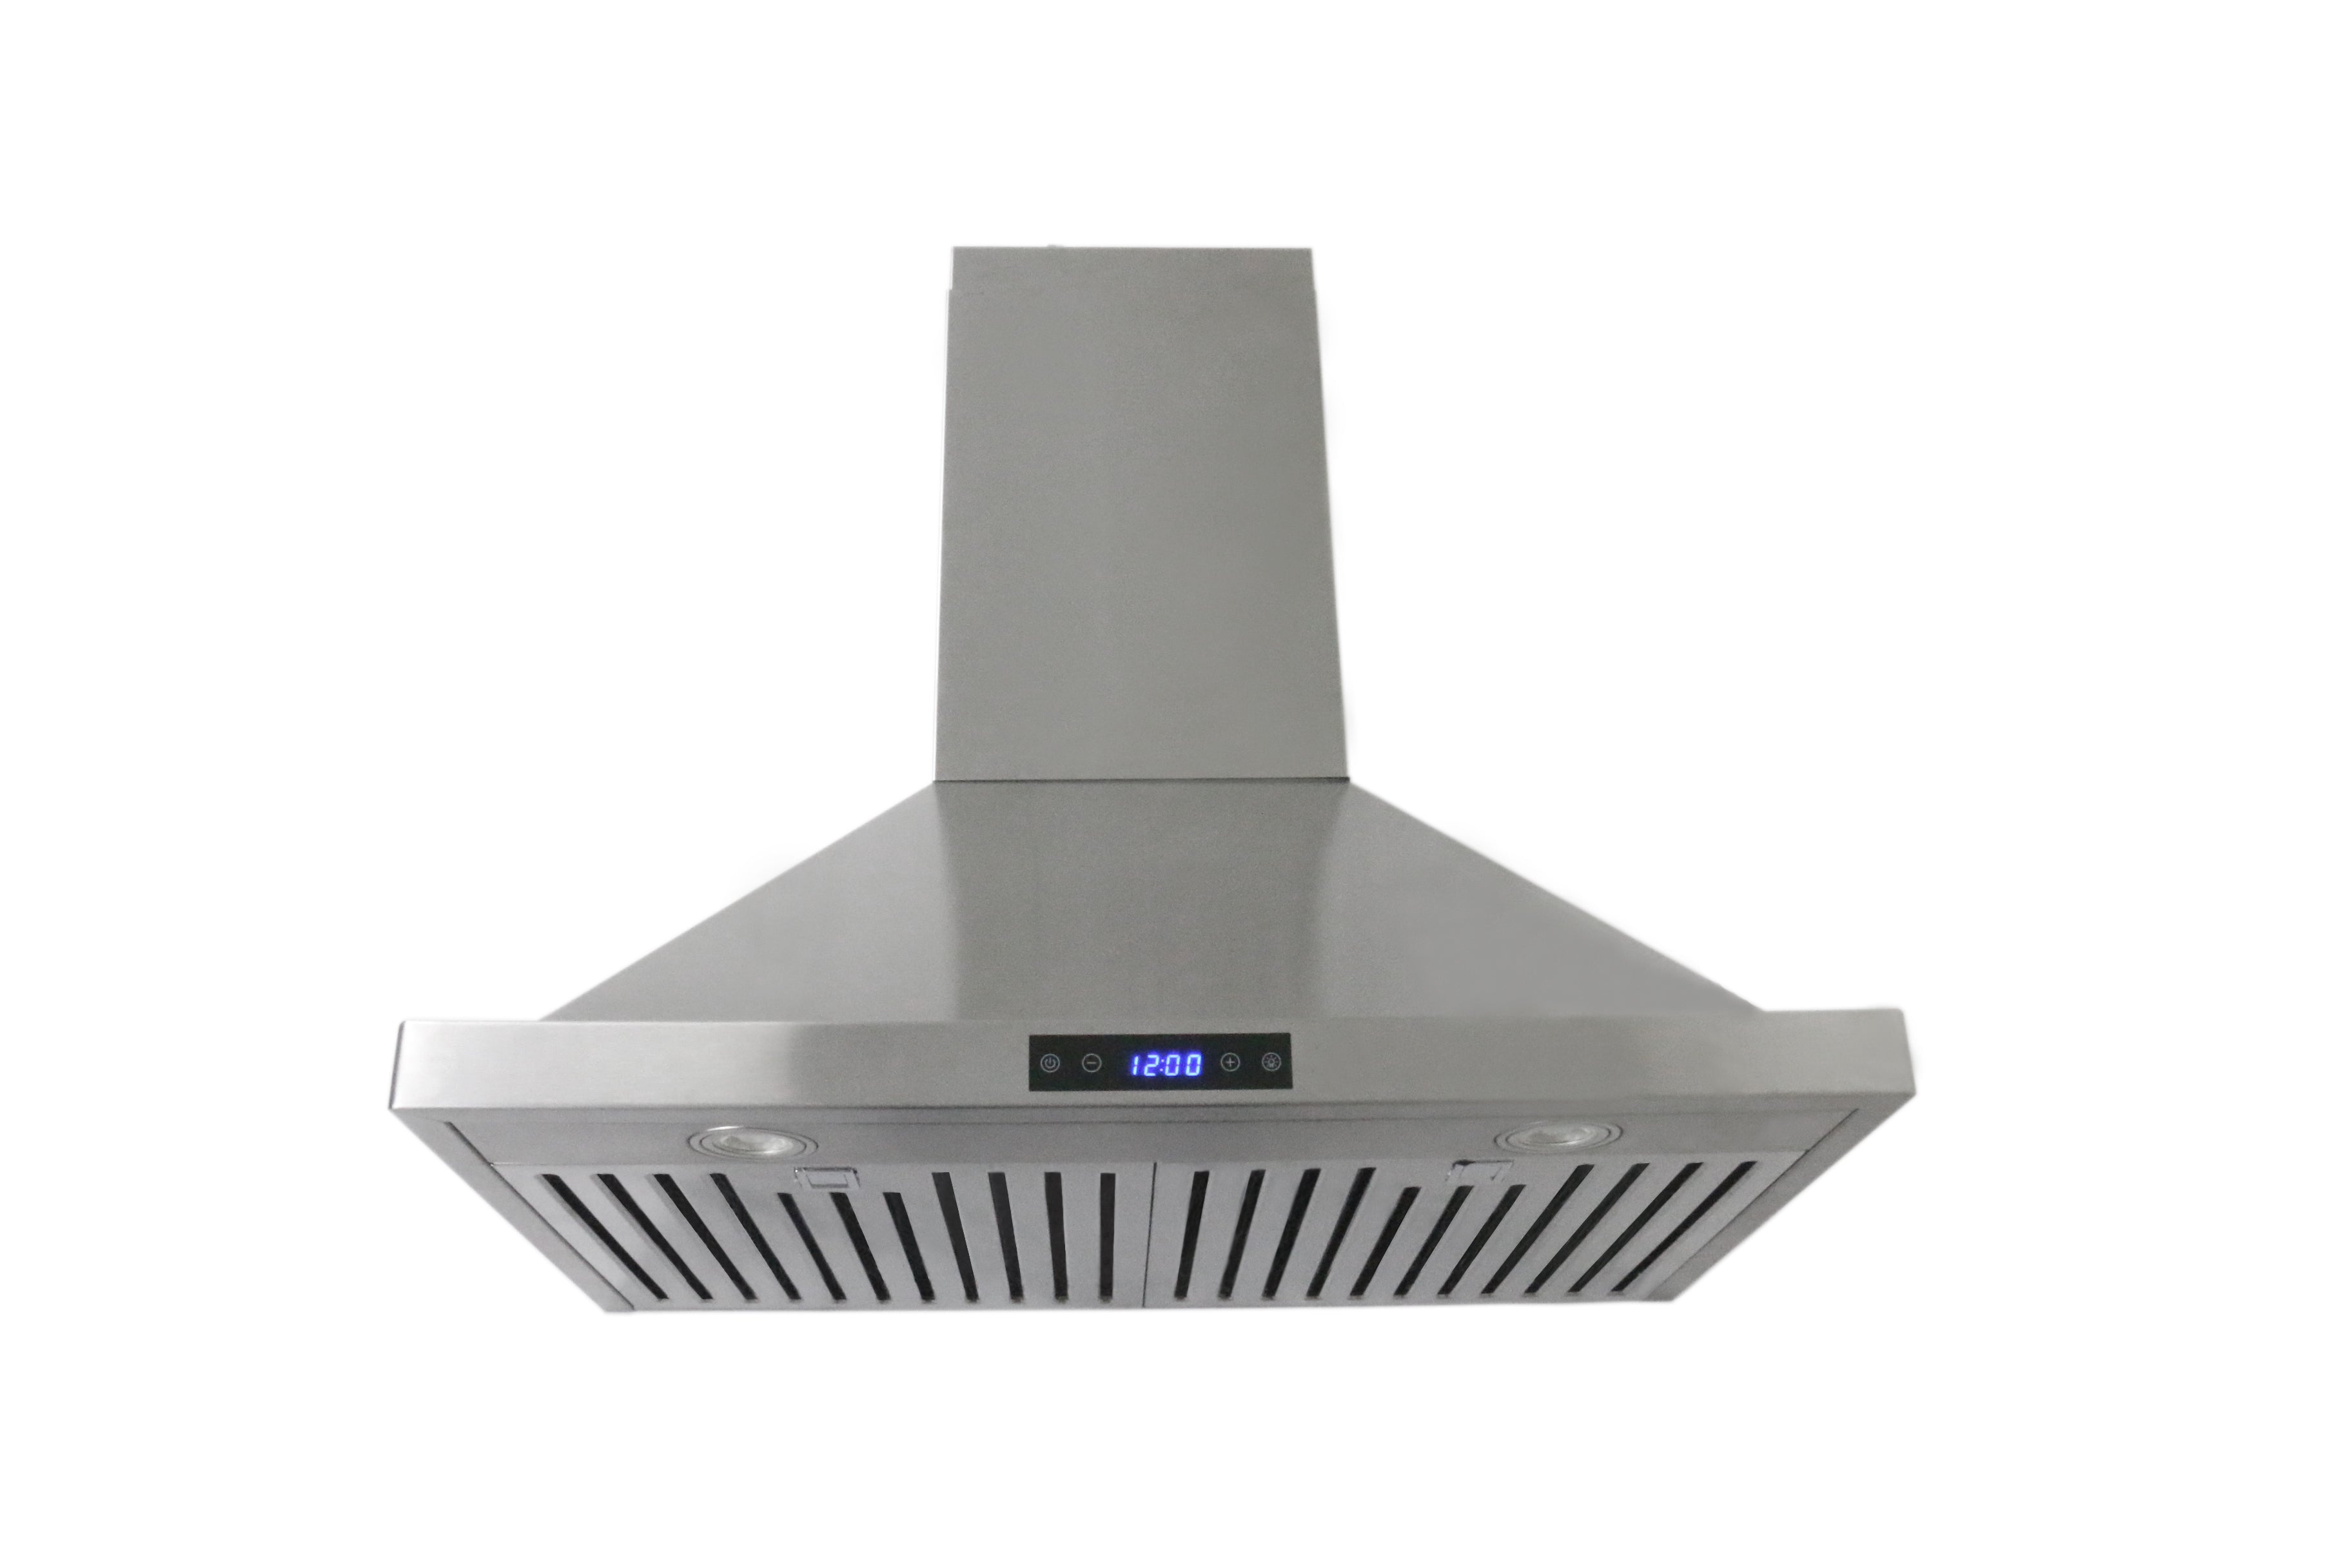 Leyso RH-WS-30 Wall Mount 41.5”H Stainless Steel Range hood 3 Speeds, 6” Round Top Vent 760 CFM, 2 LED Lights, Baffle Filters